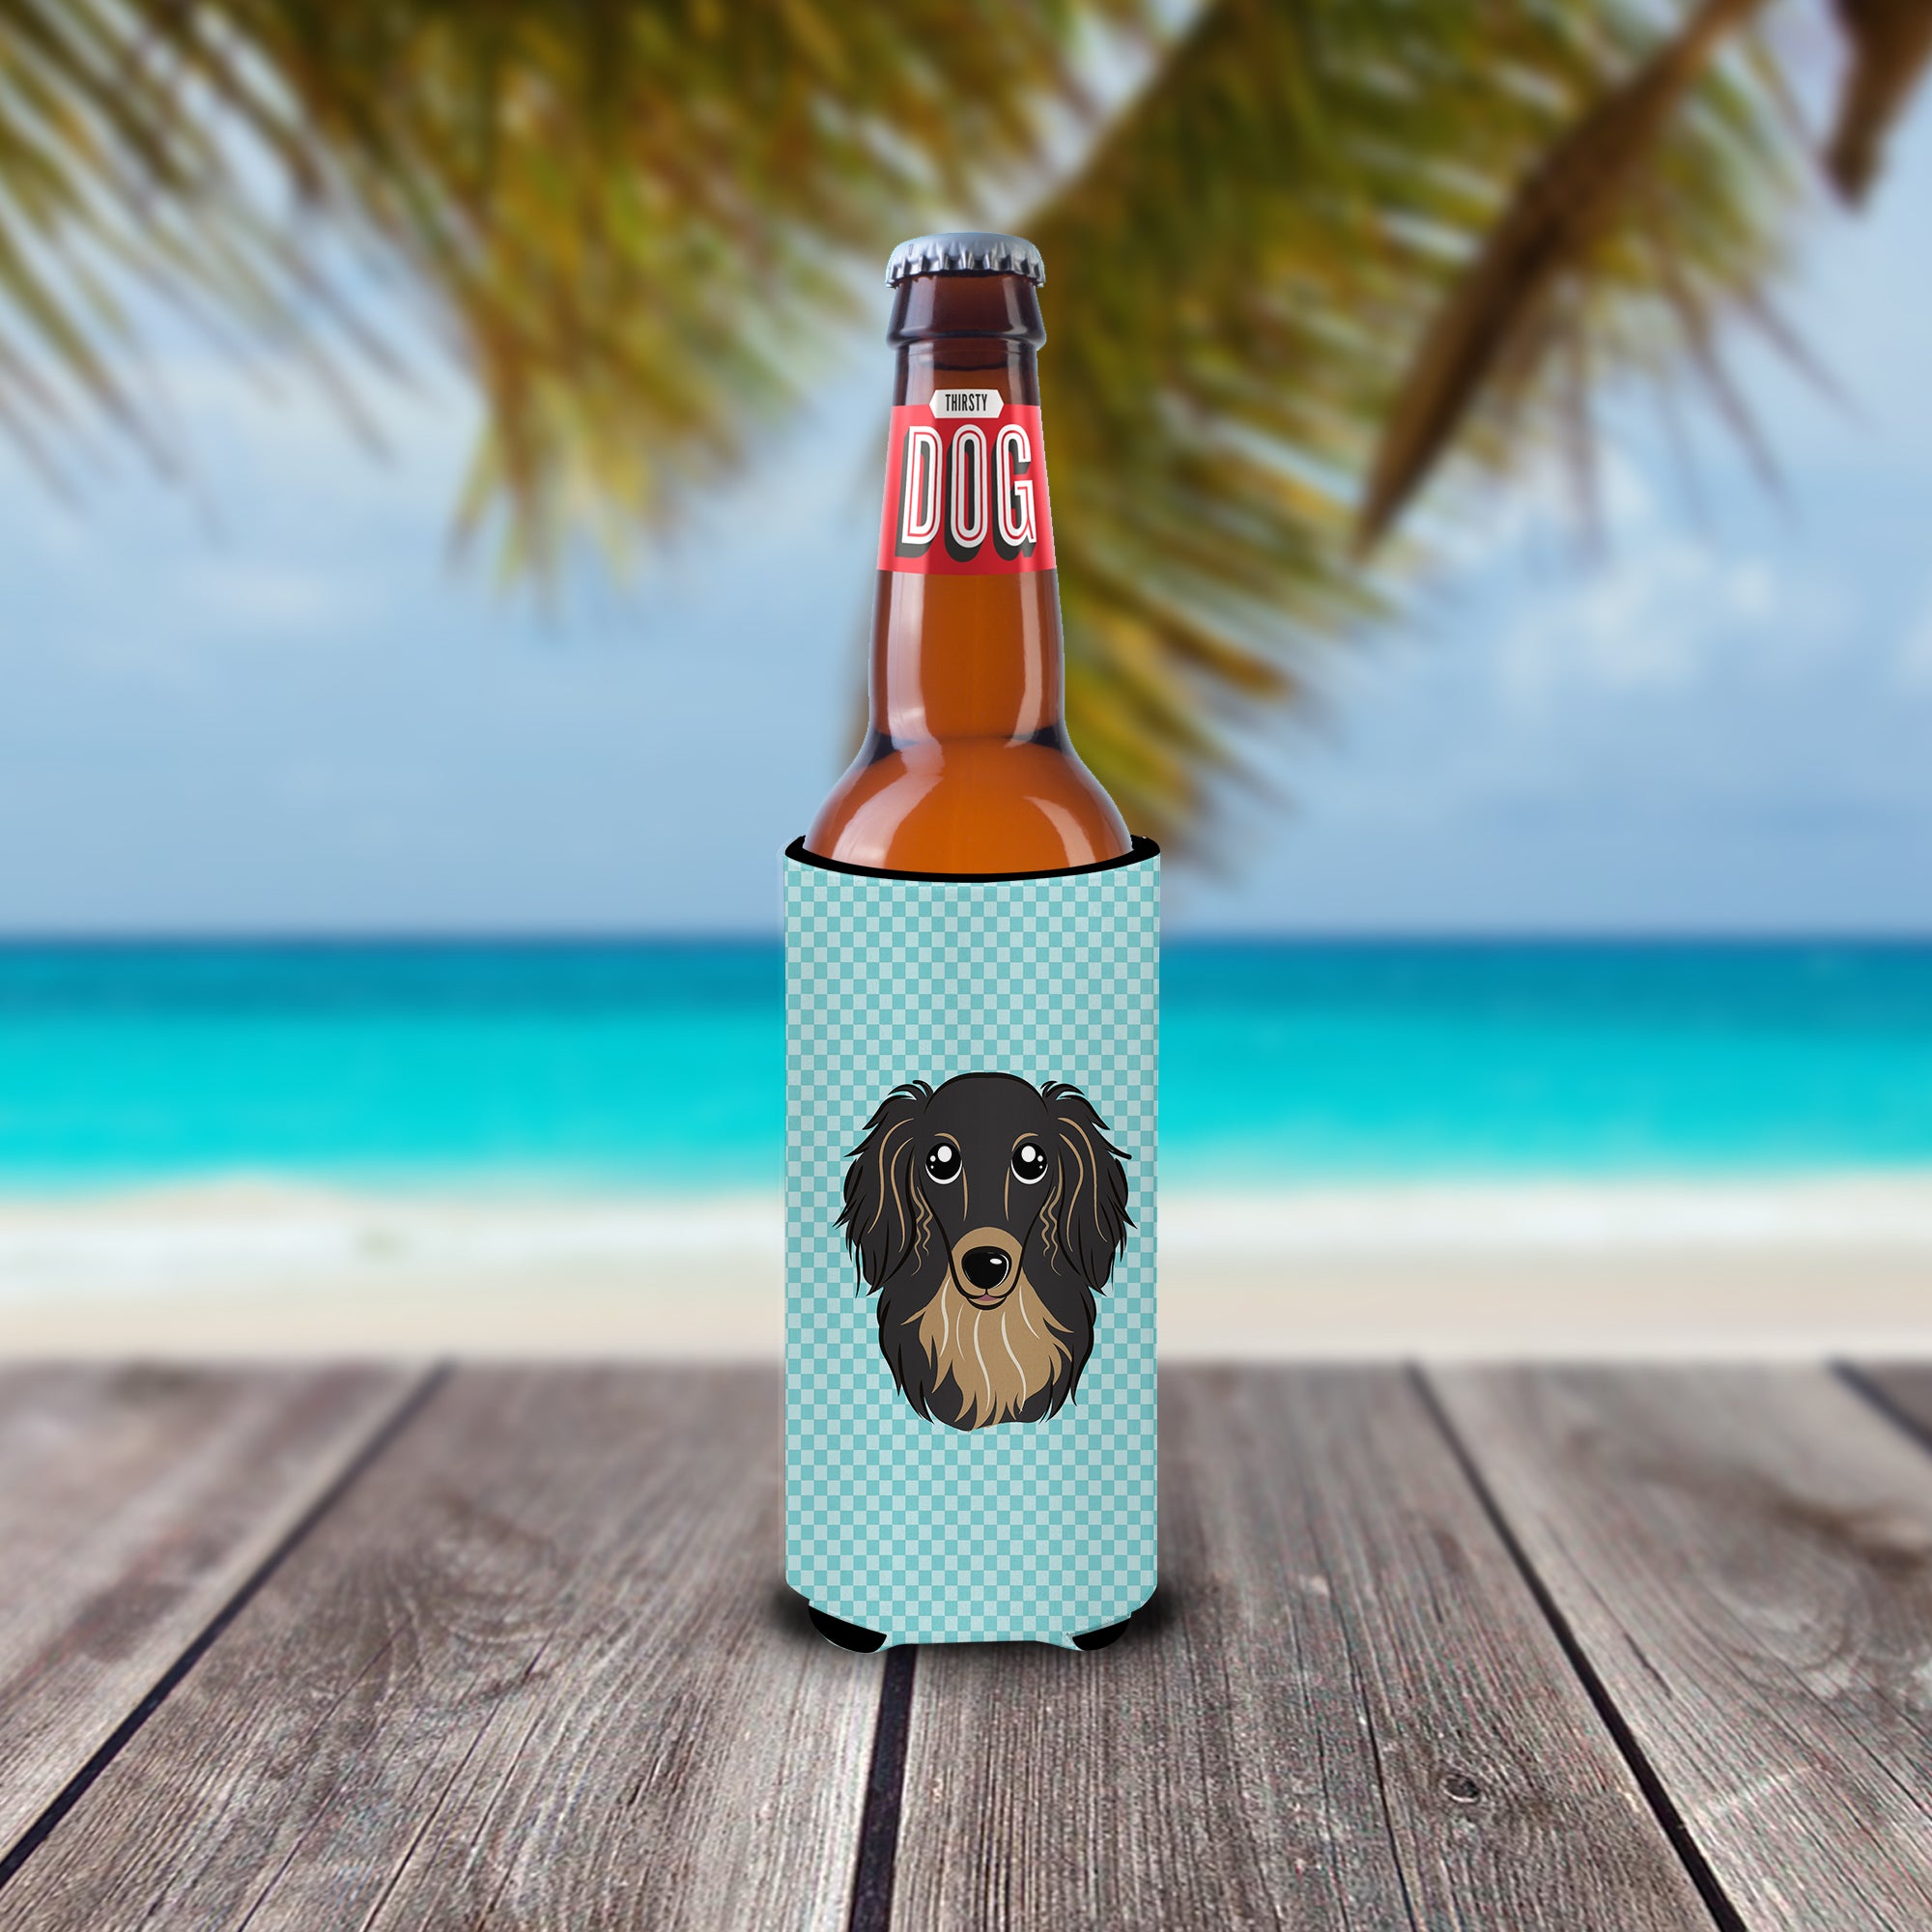 Checkerboard Blue Longhair Dachshund Ultra Beverage Insulators for slim cans